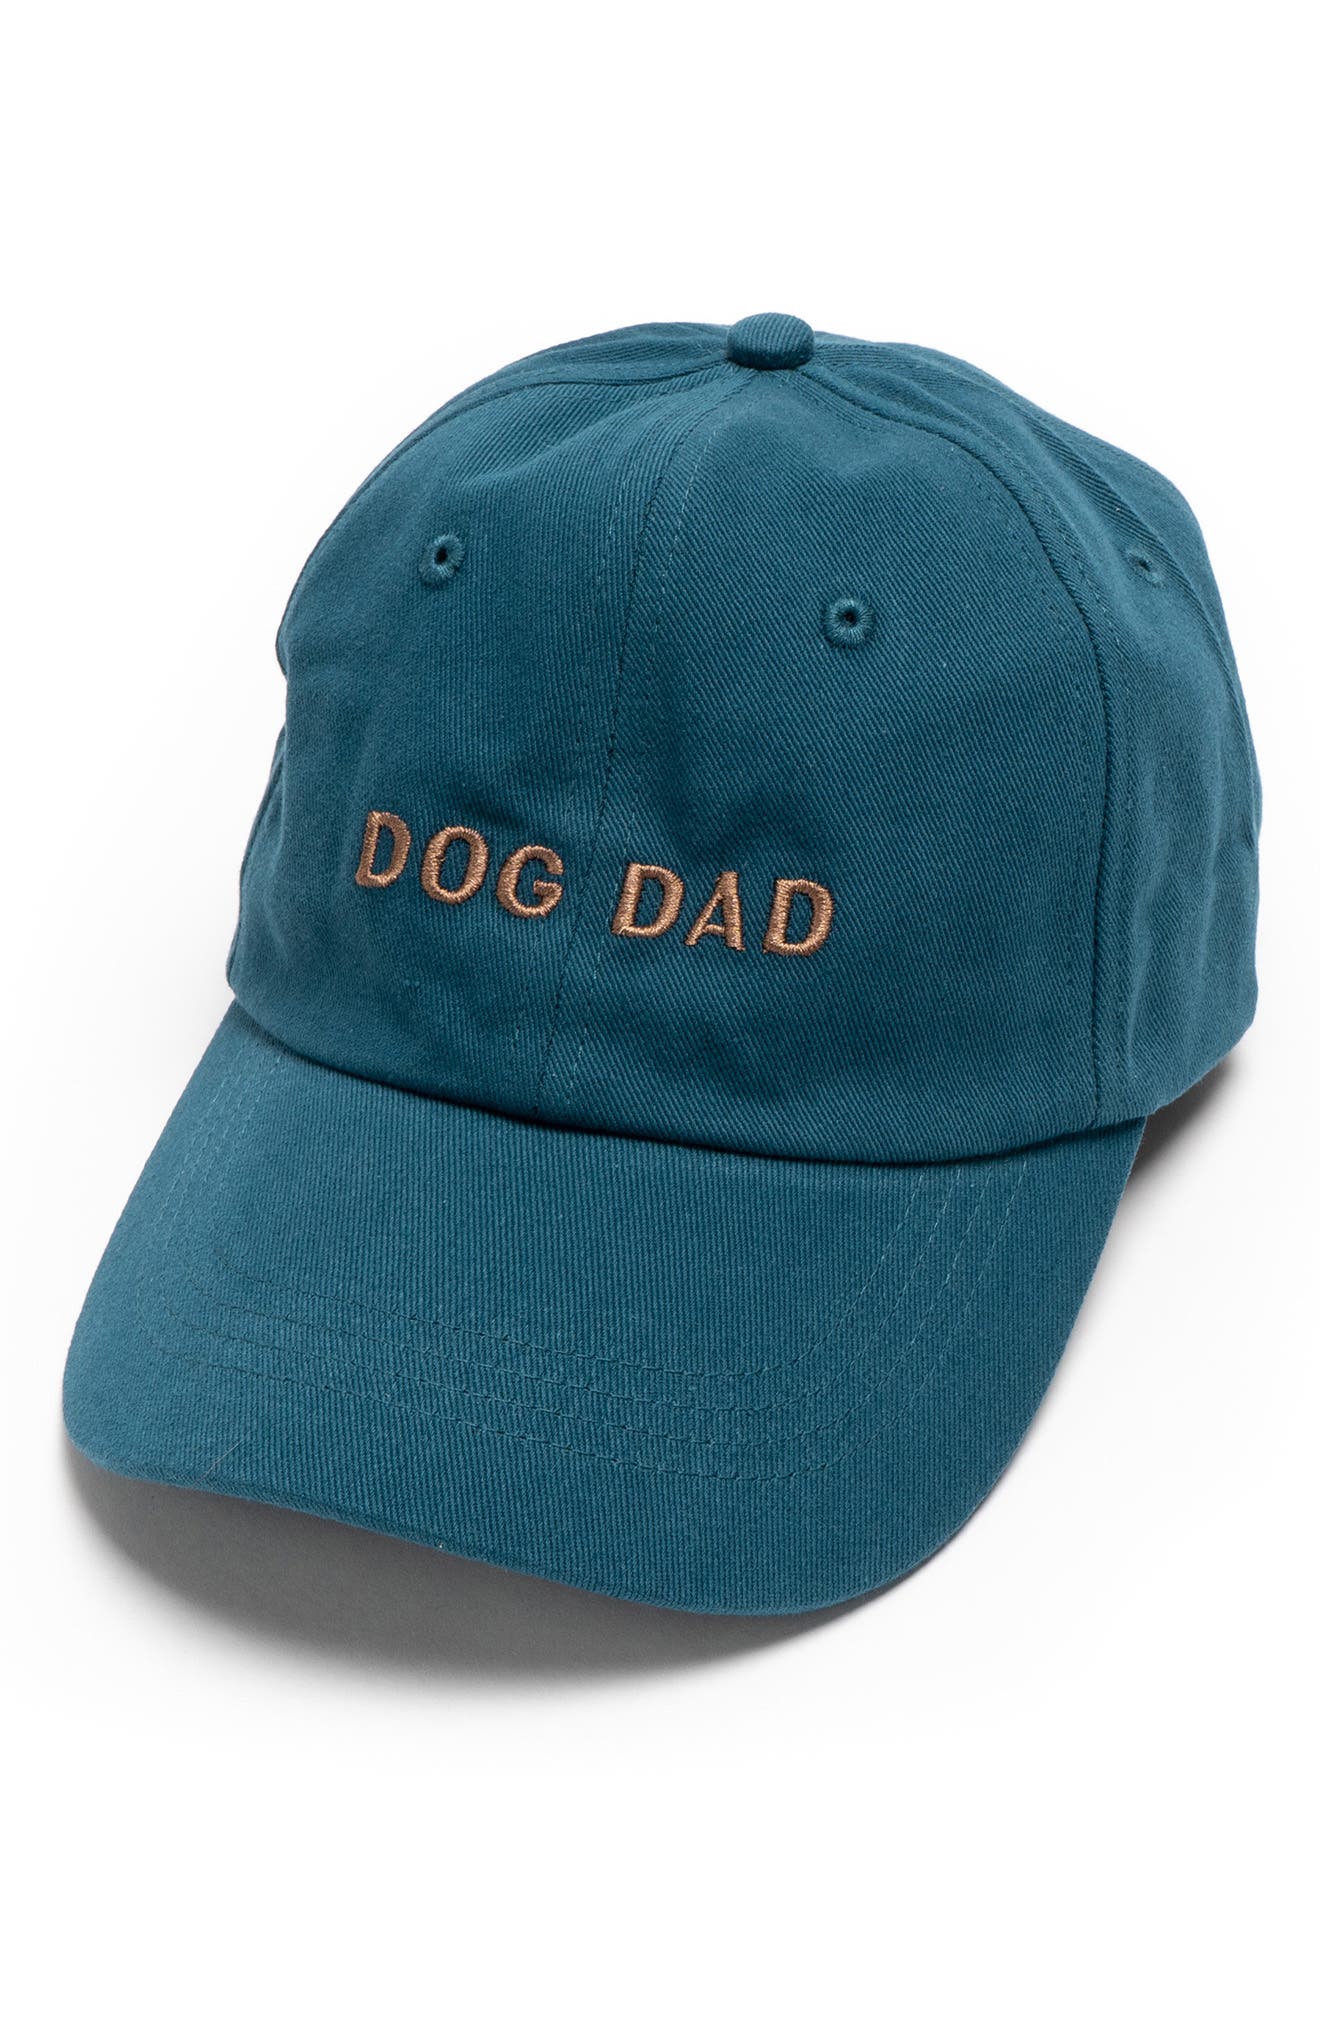 Lucy & Co. Dog Dad Baseball Hat in Prussian Blue at Nordstrom